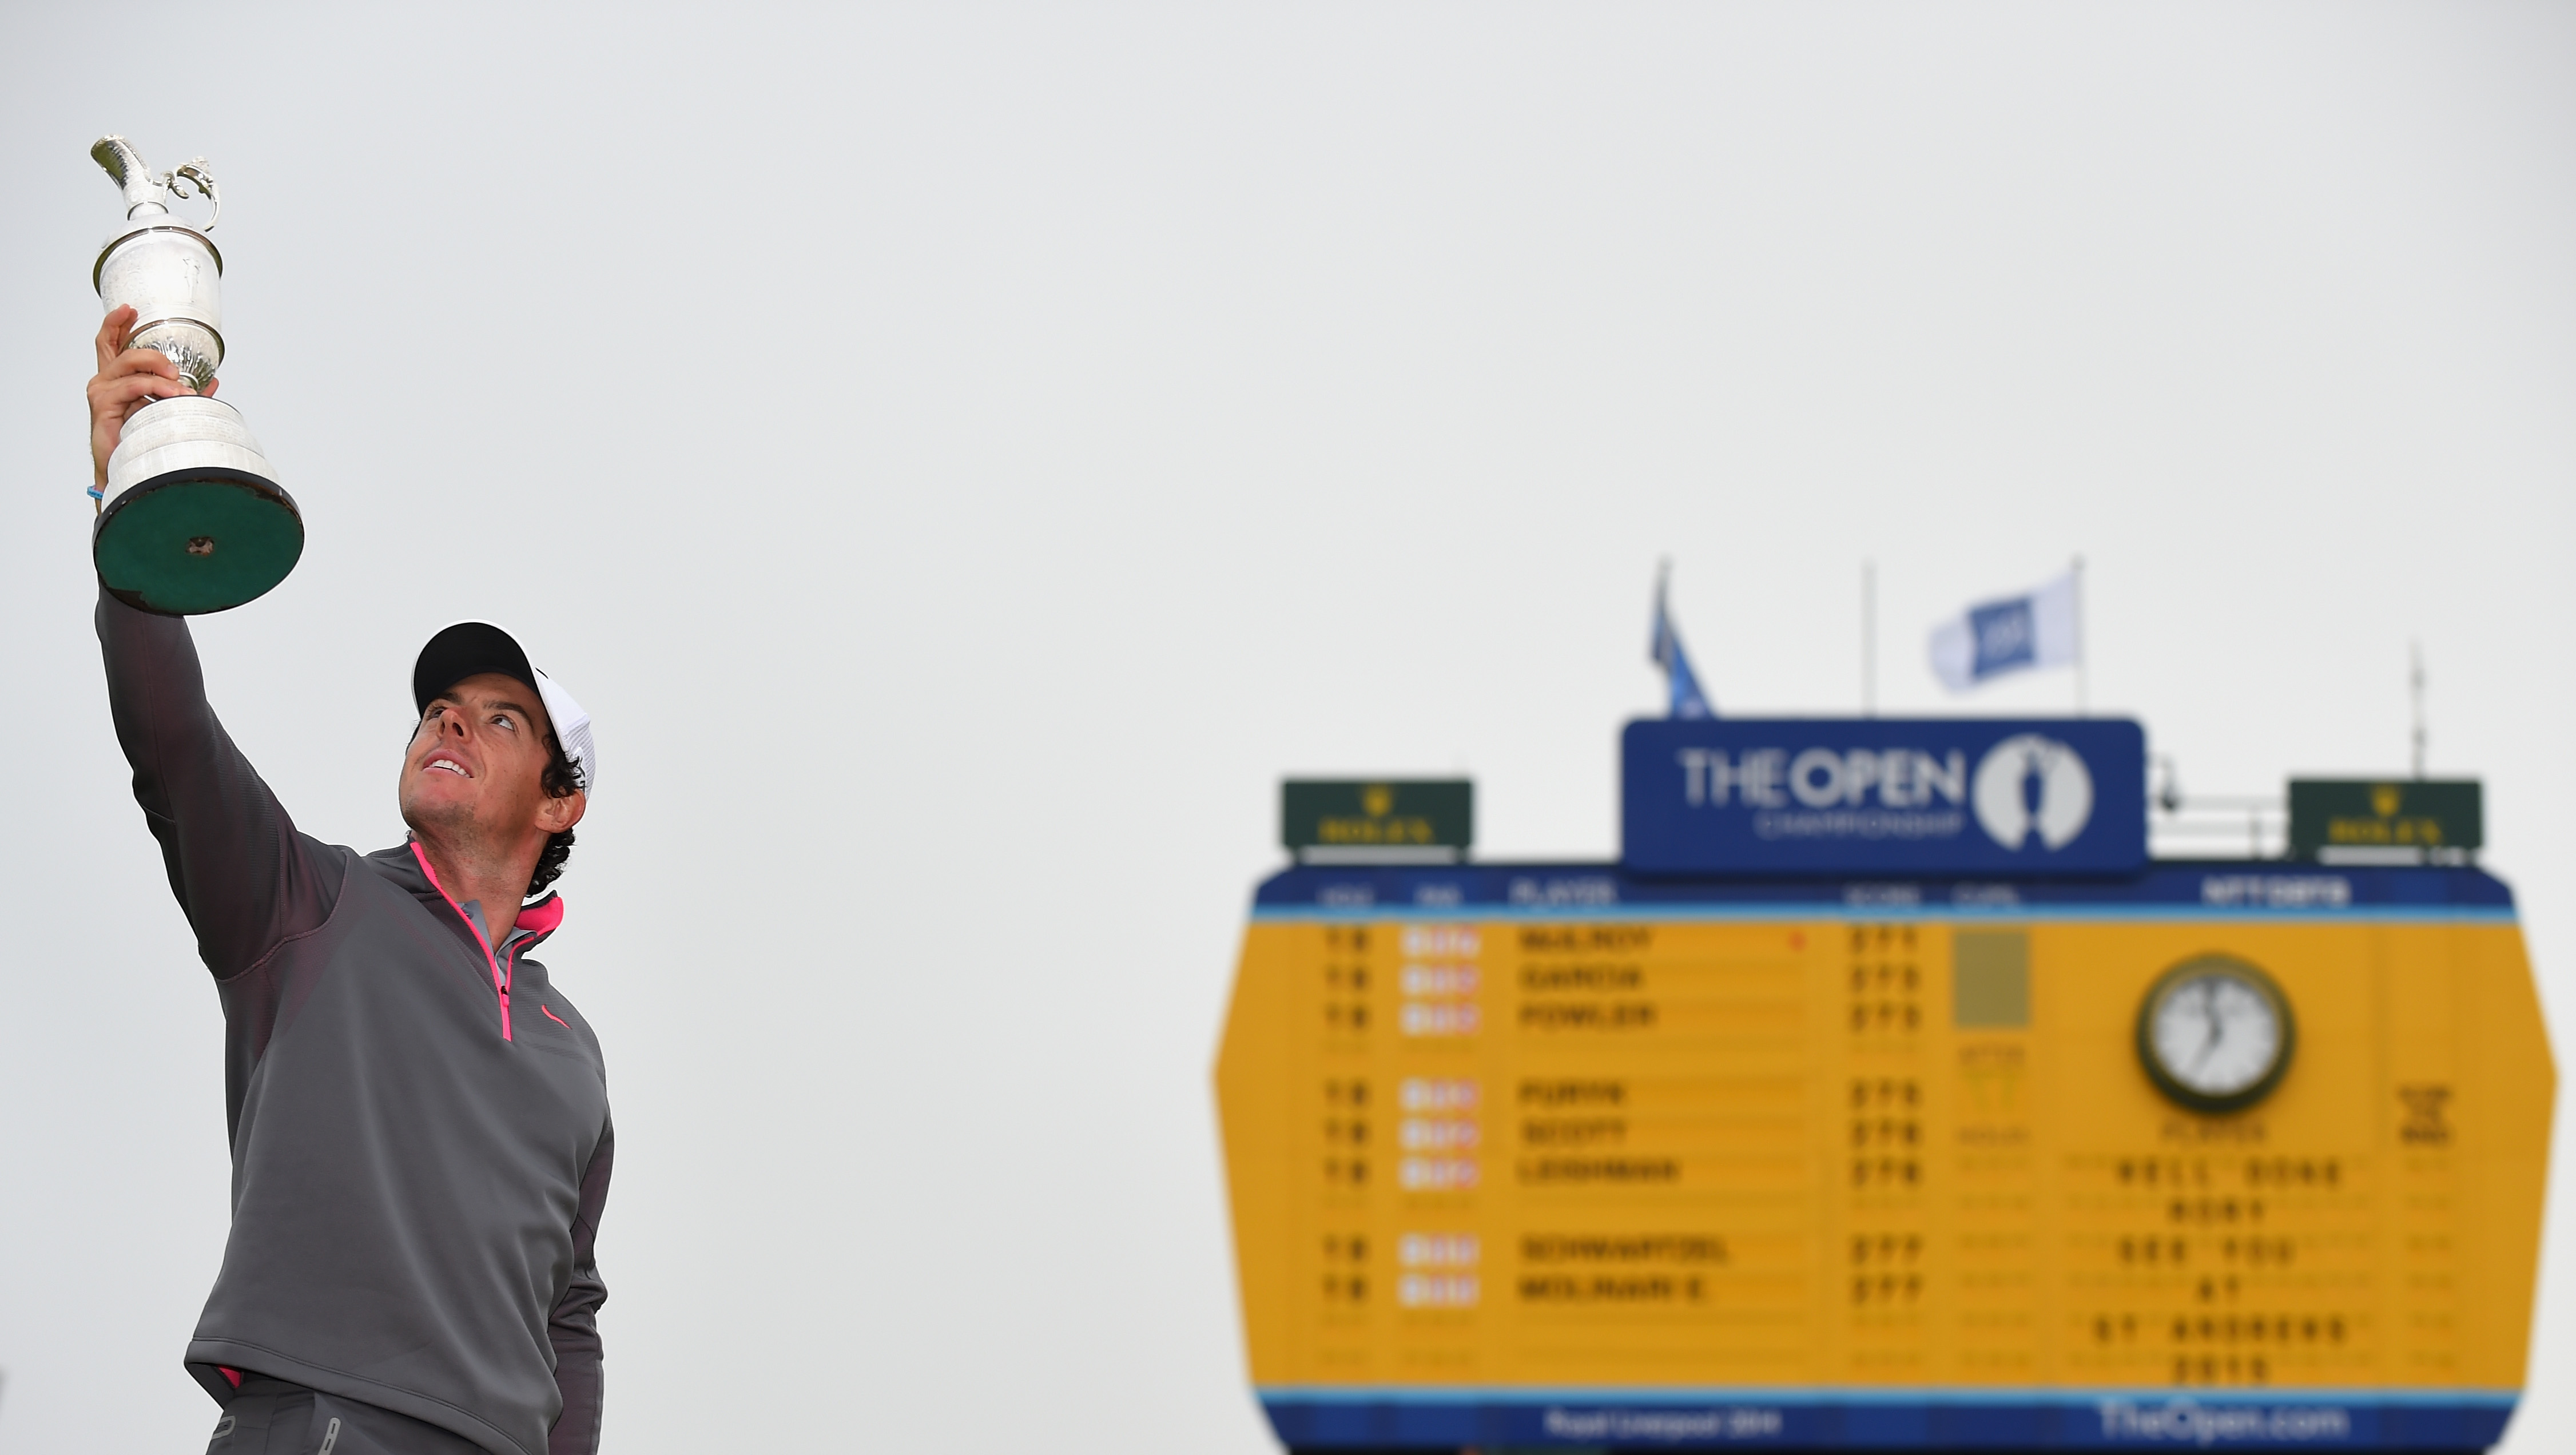 McIlroy will not defence his Open title because of an ankle injury (Photo: Getty Images)